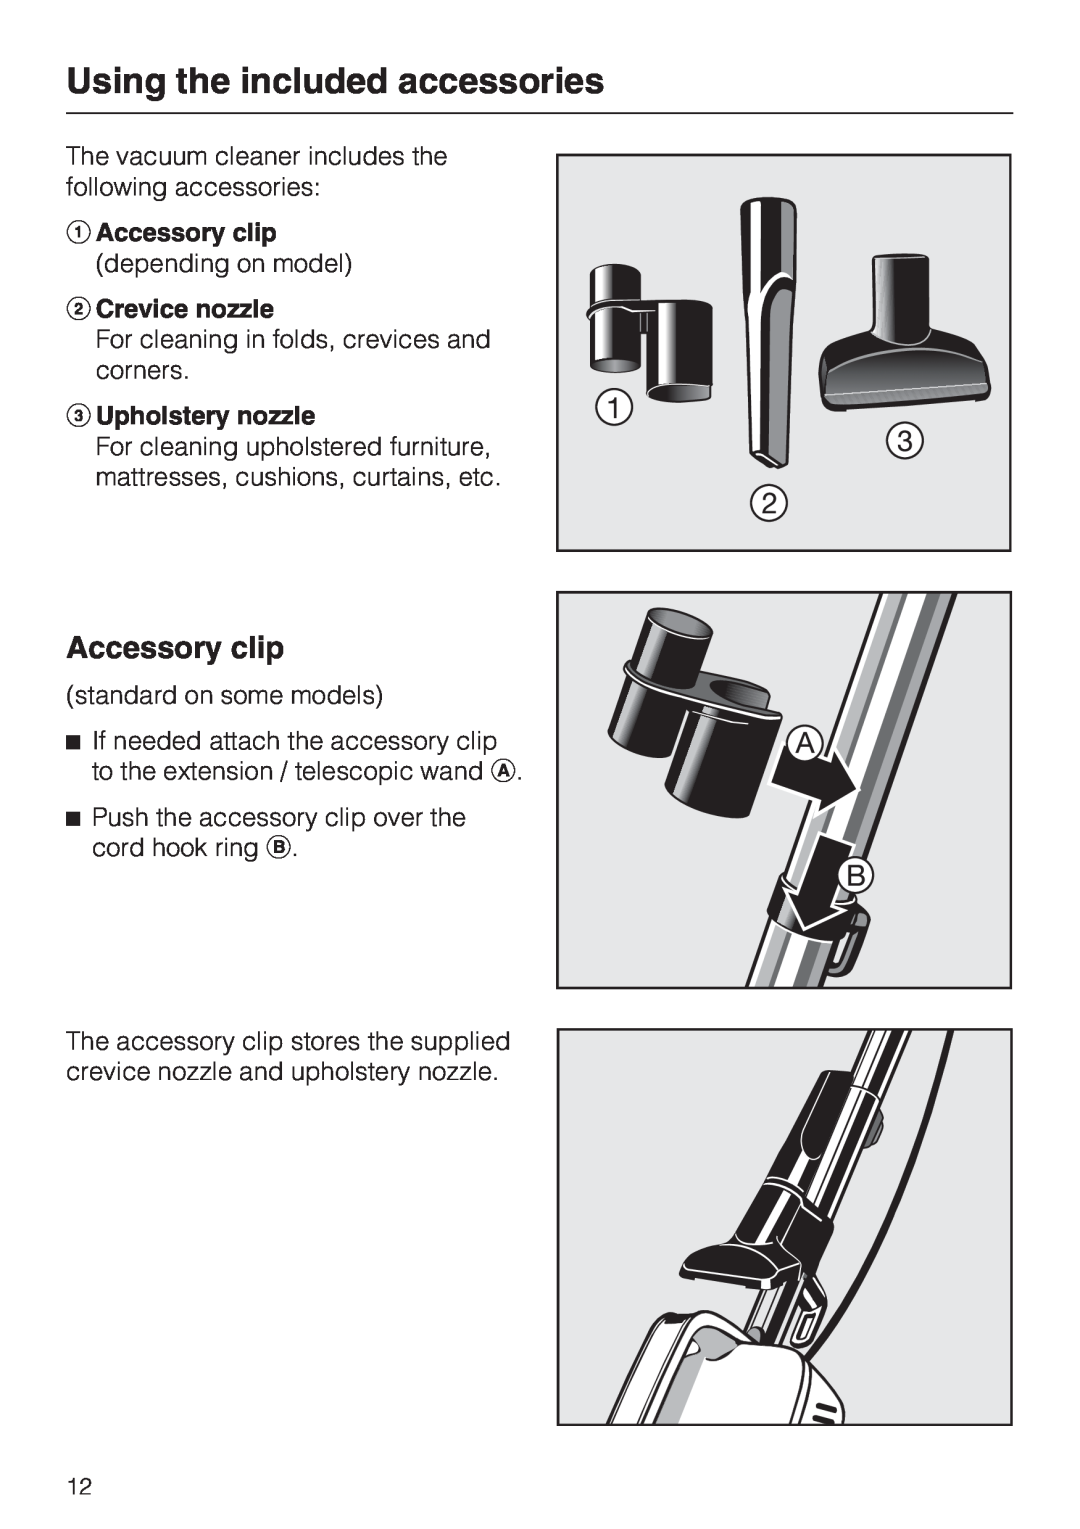 Miele S 190 manual Using the included accessories, Accessory clip, Crevice nozzle, Upholstery nozzle 